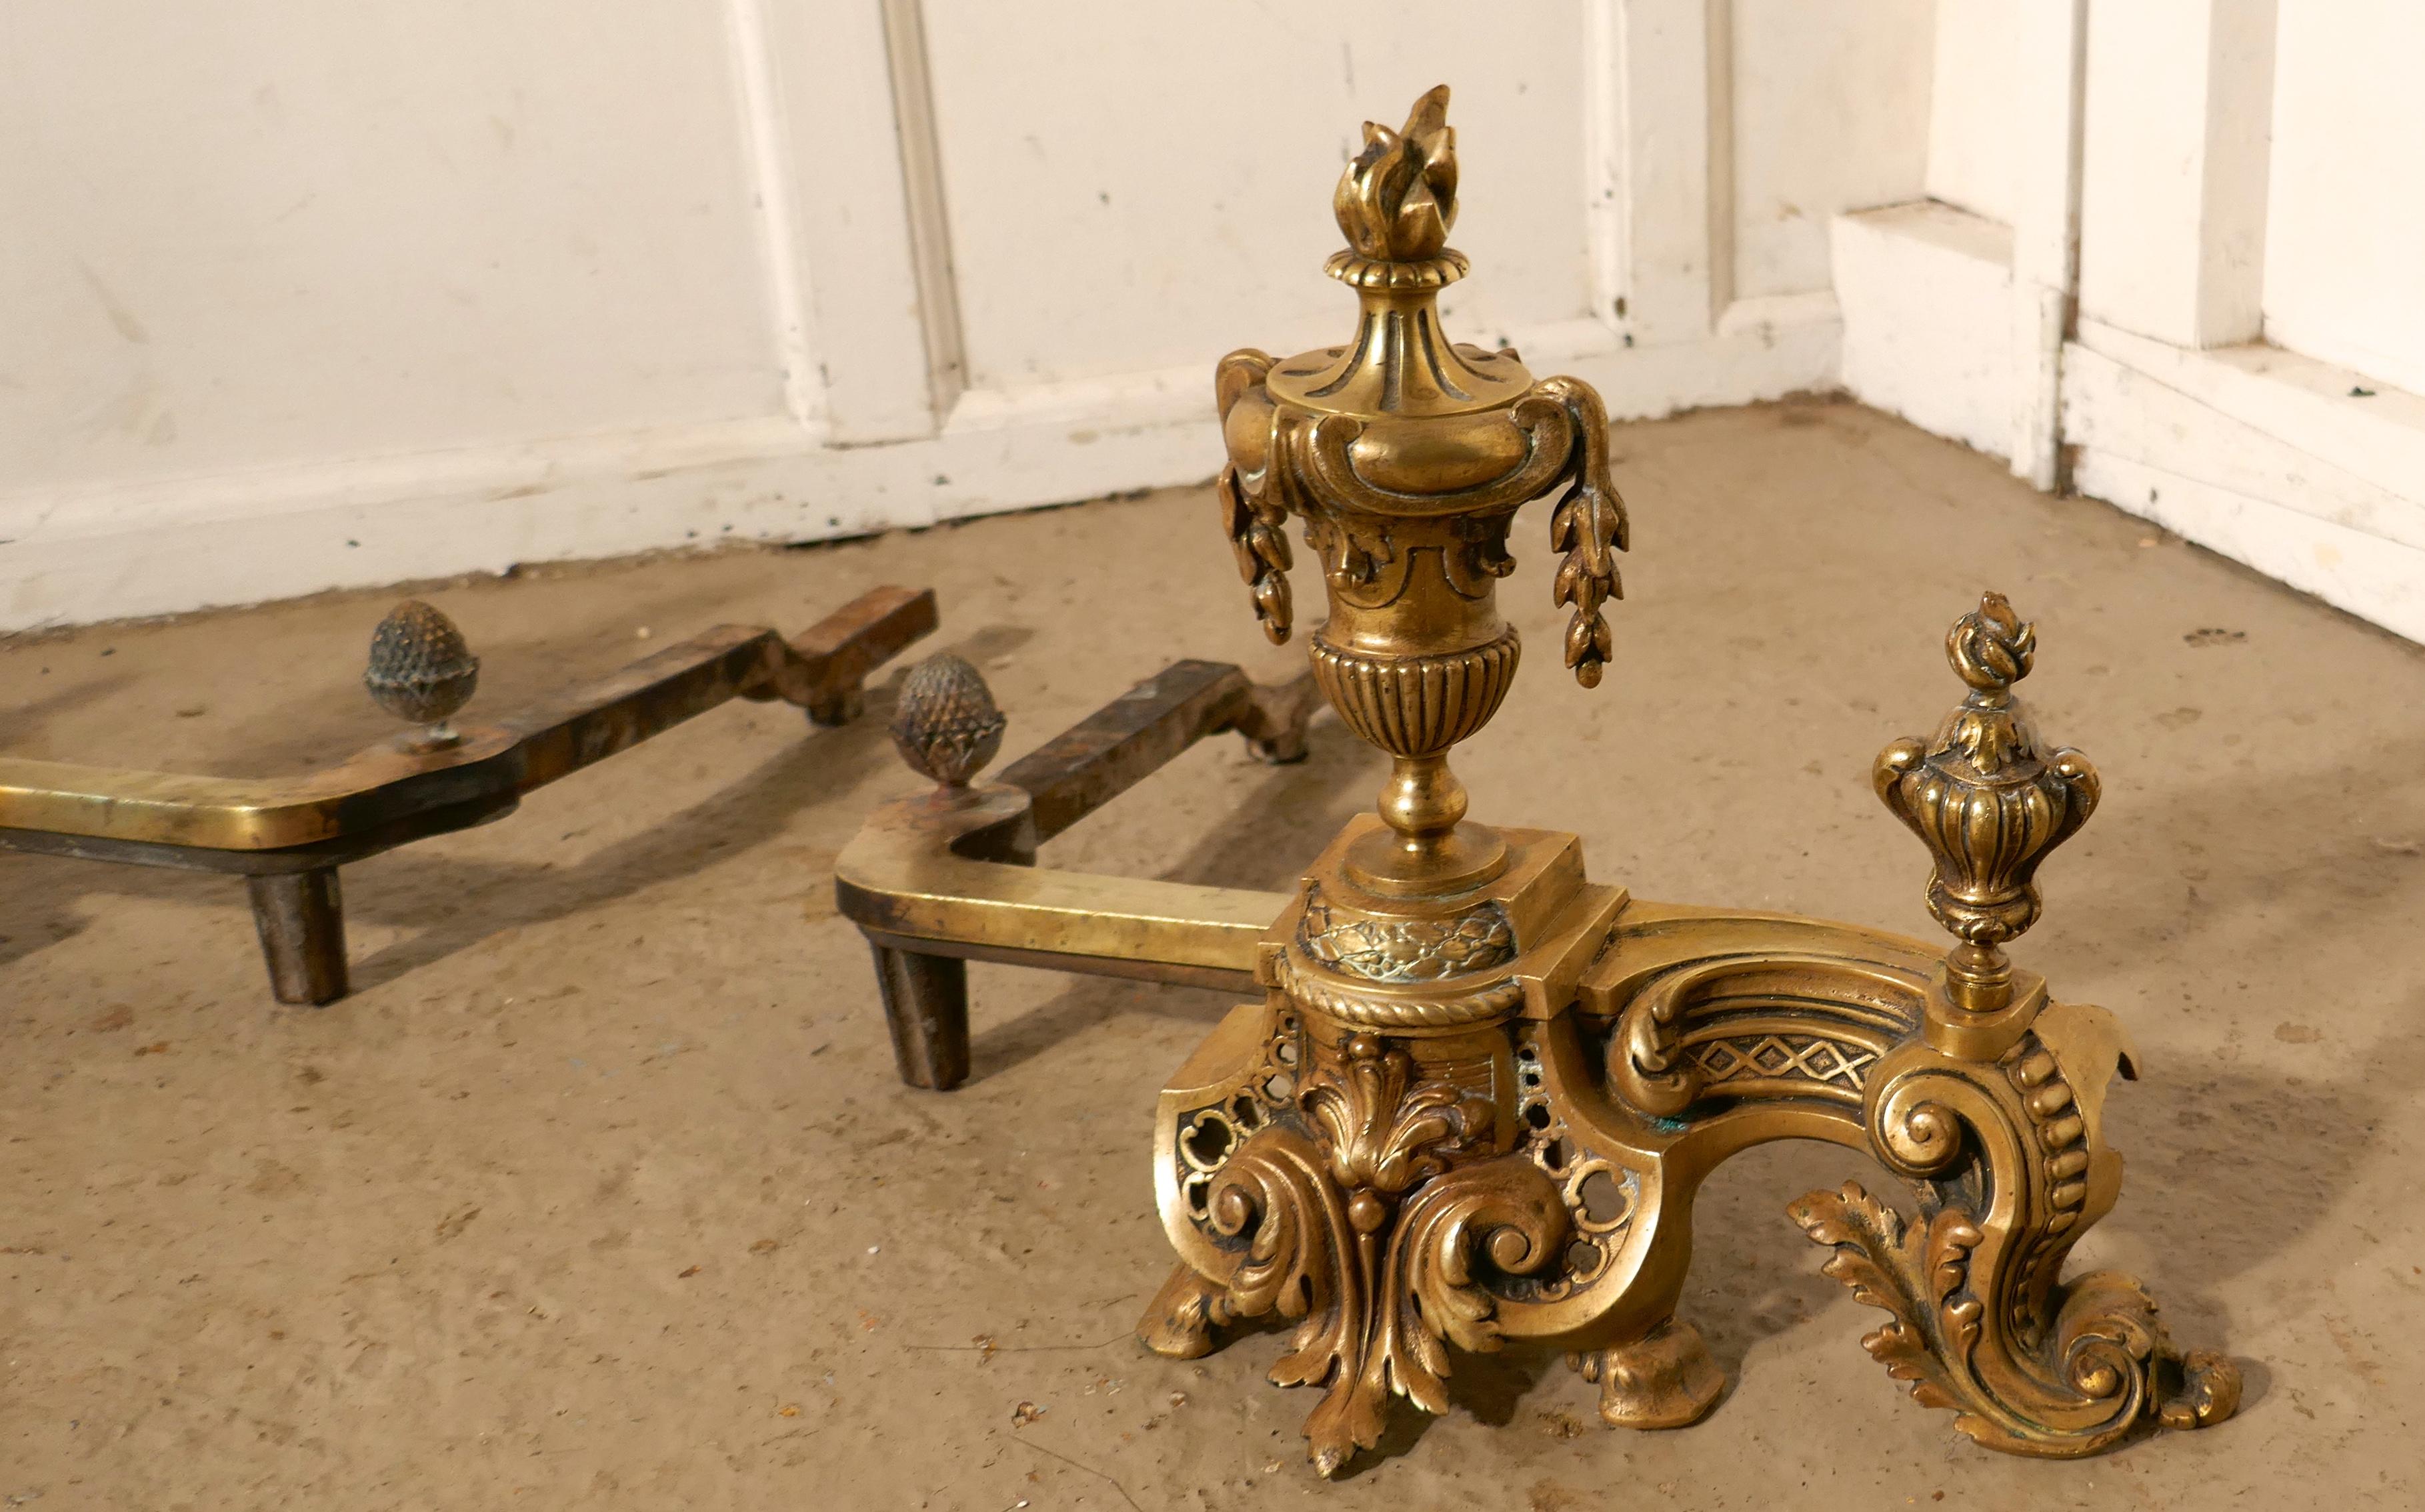 A pair of large French Rococo brass andirons or chenets

This is a very large pair of french brass andirons, the ultimate in Chateau Chic

They are made of cast brass in the shape of Classical Greek urns decorated with many swags and acanthus